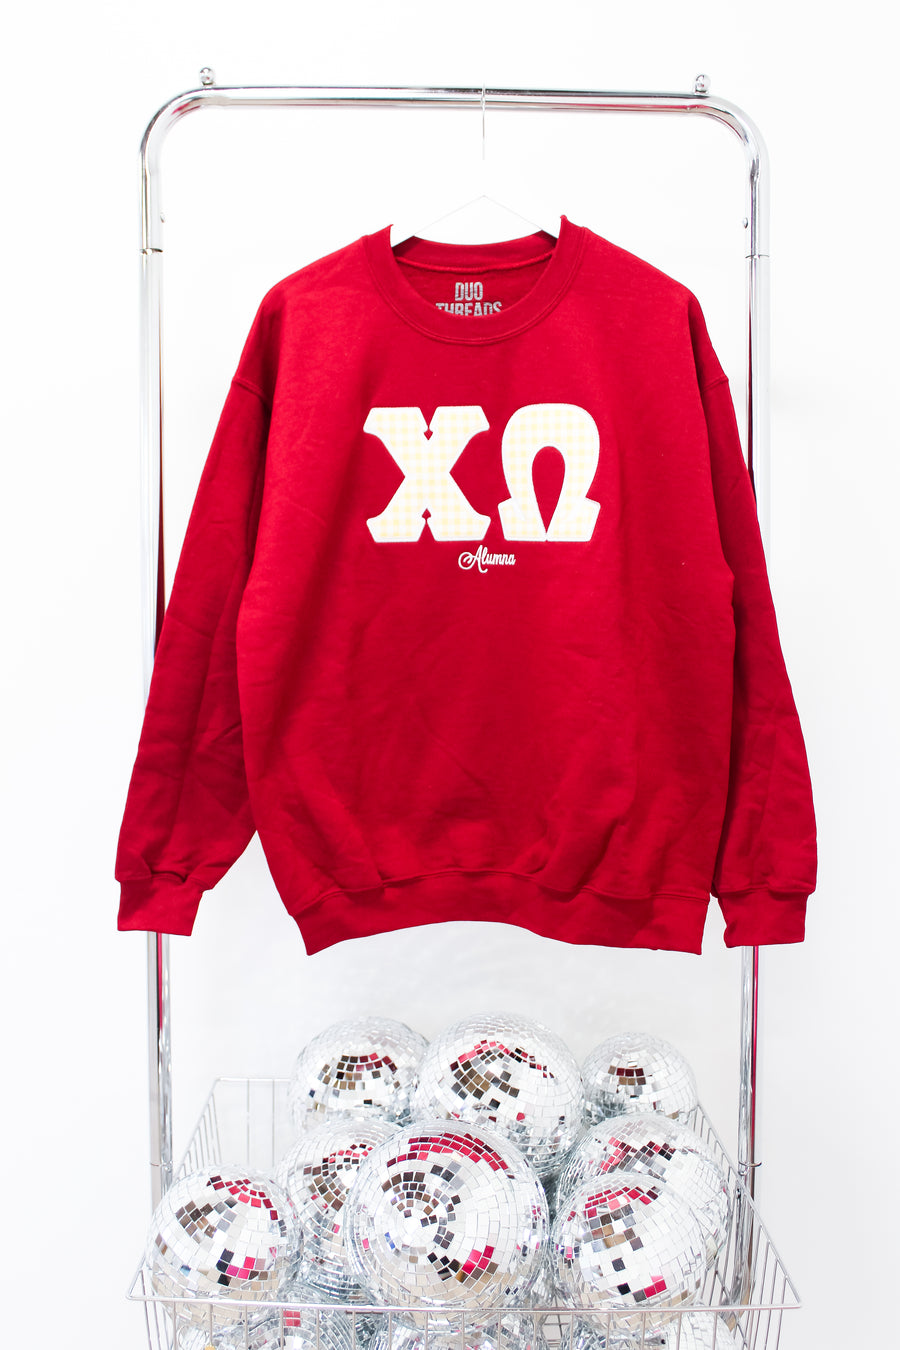 Chi Omega Embroidered Letter Alumna Crew - LG RED